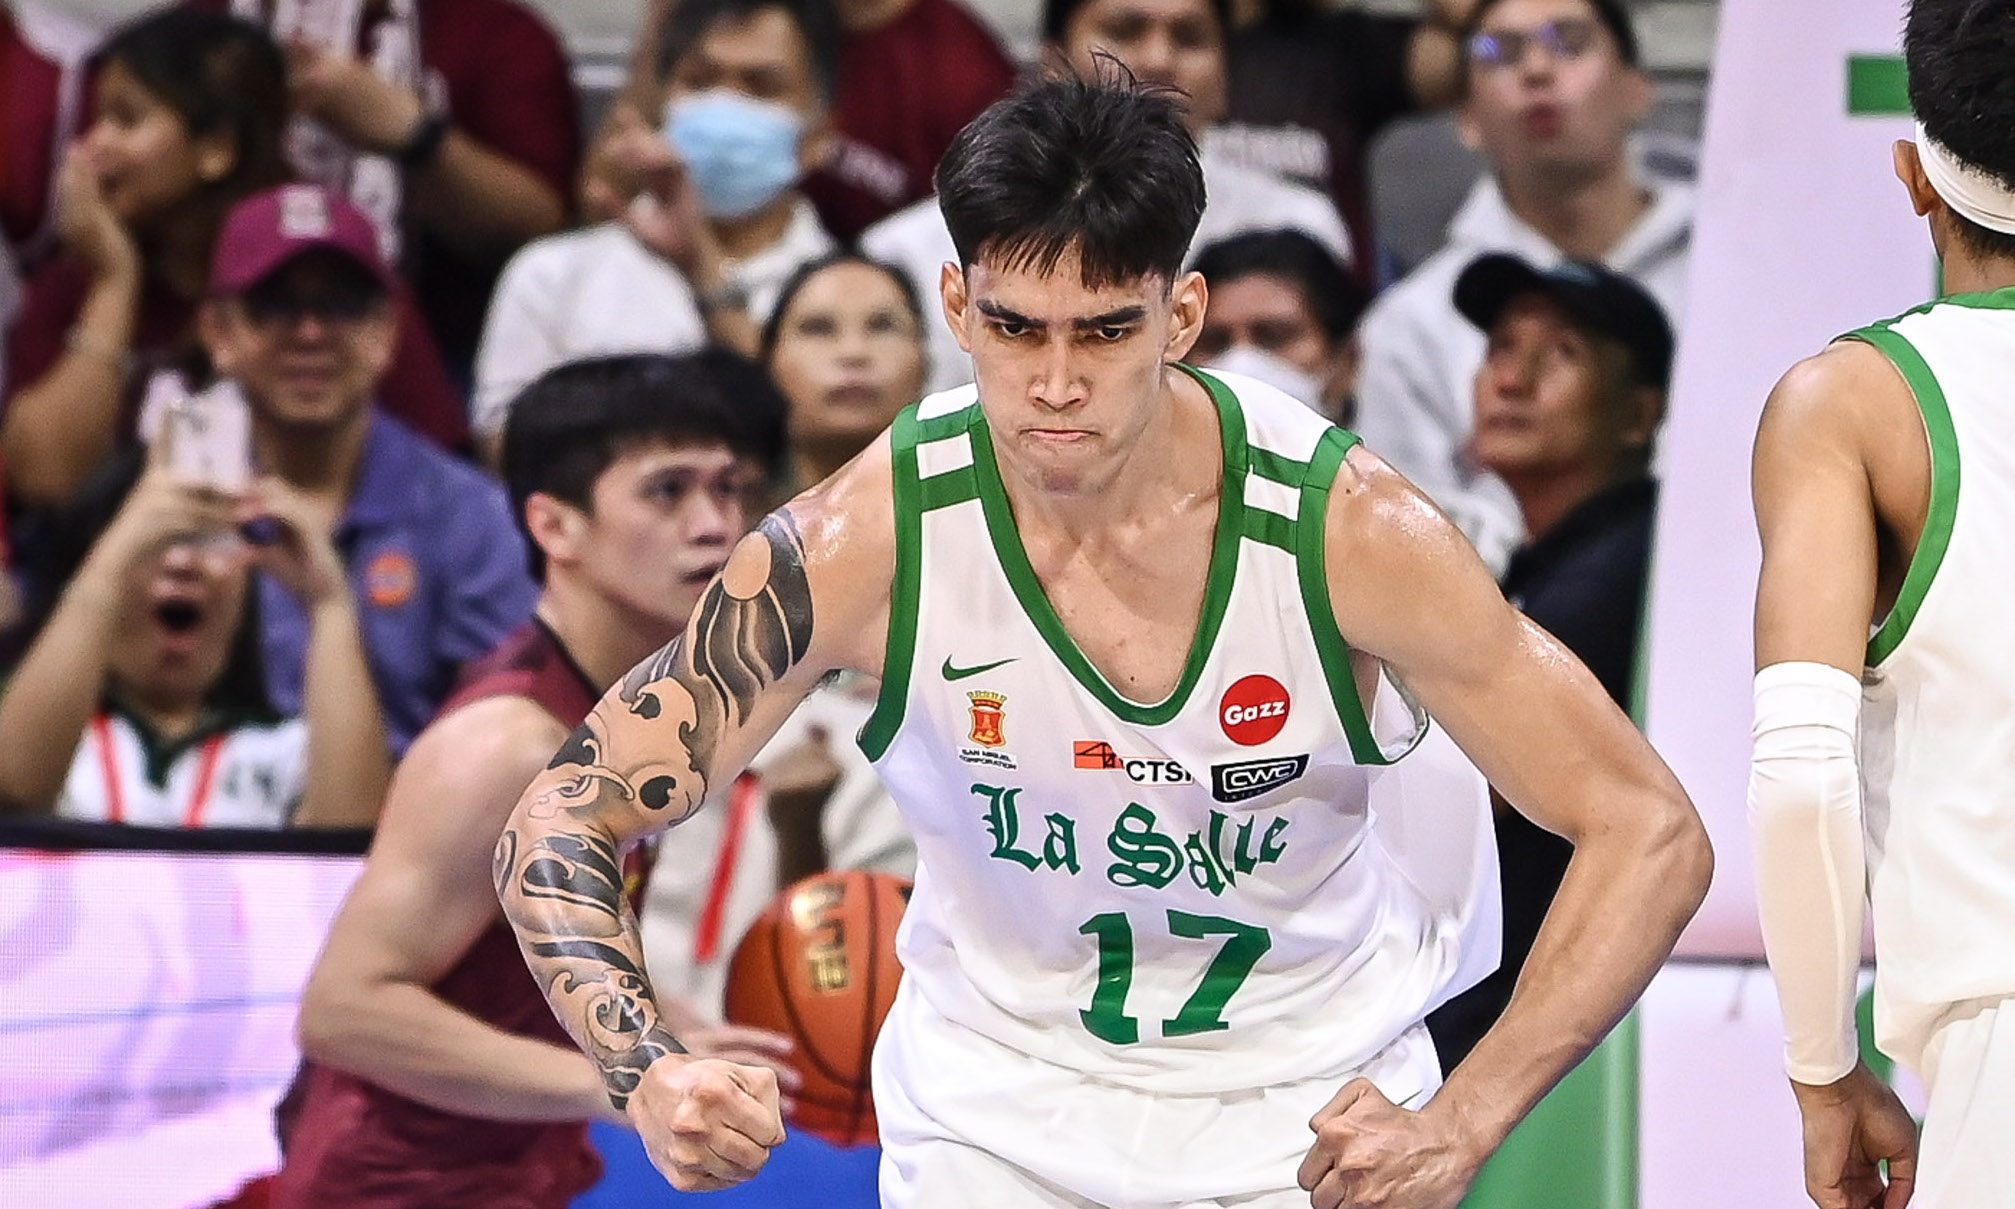 No ego: MVP Quiambao embraces off-the-bench role for La Salle in UAAP finals equalizer